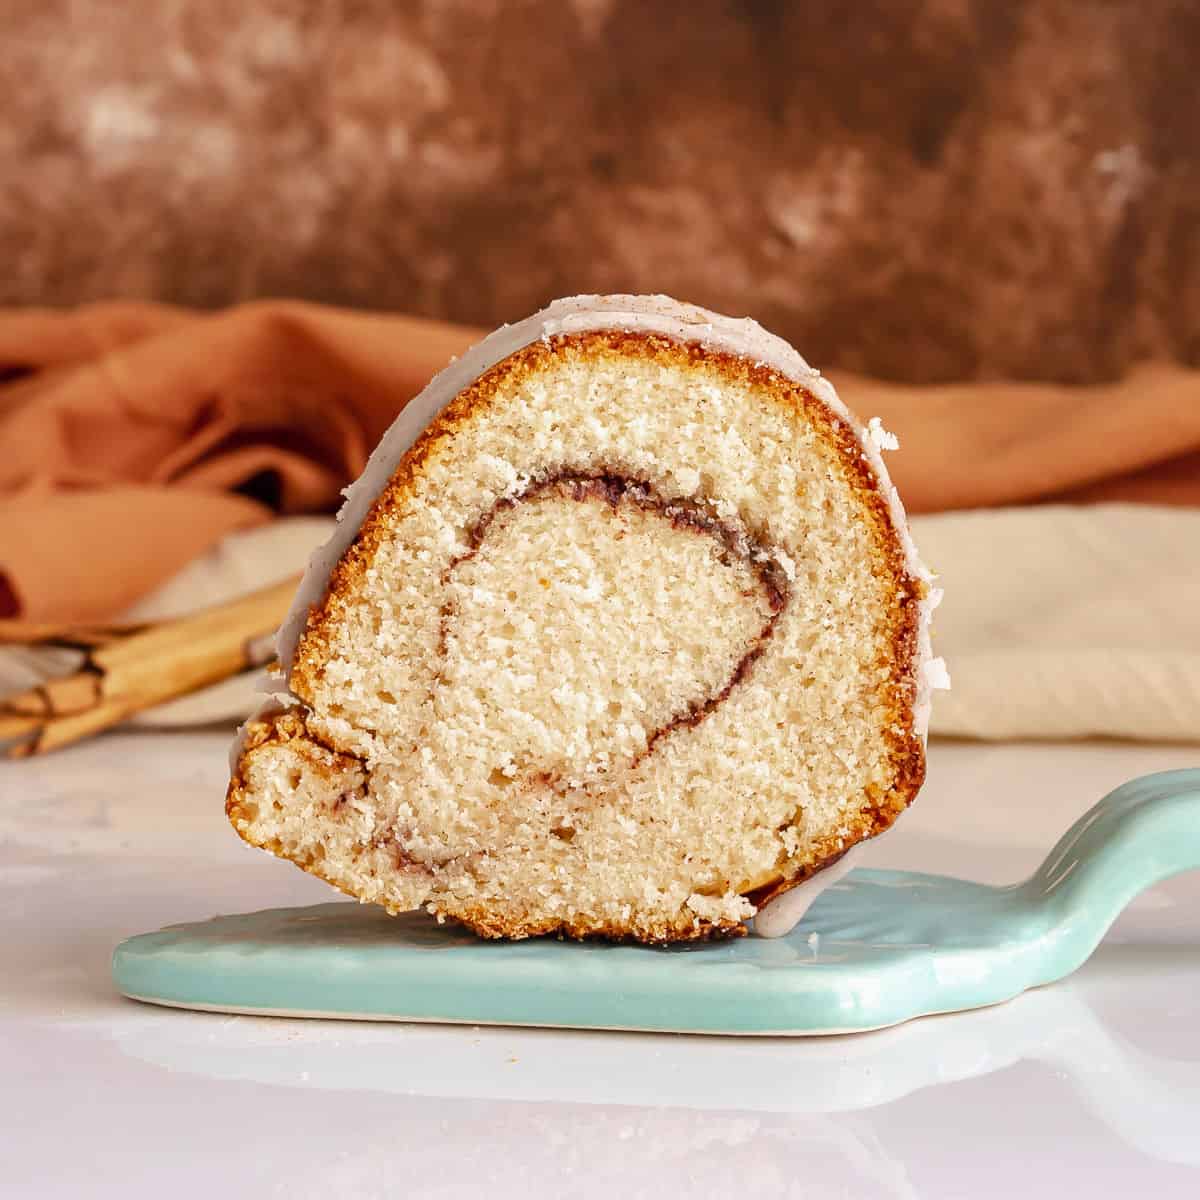 New Cinnamon Swirl Cakes At Michaels🤩 Have You Tried Them Yet